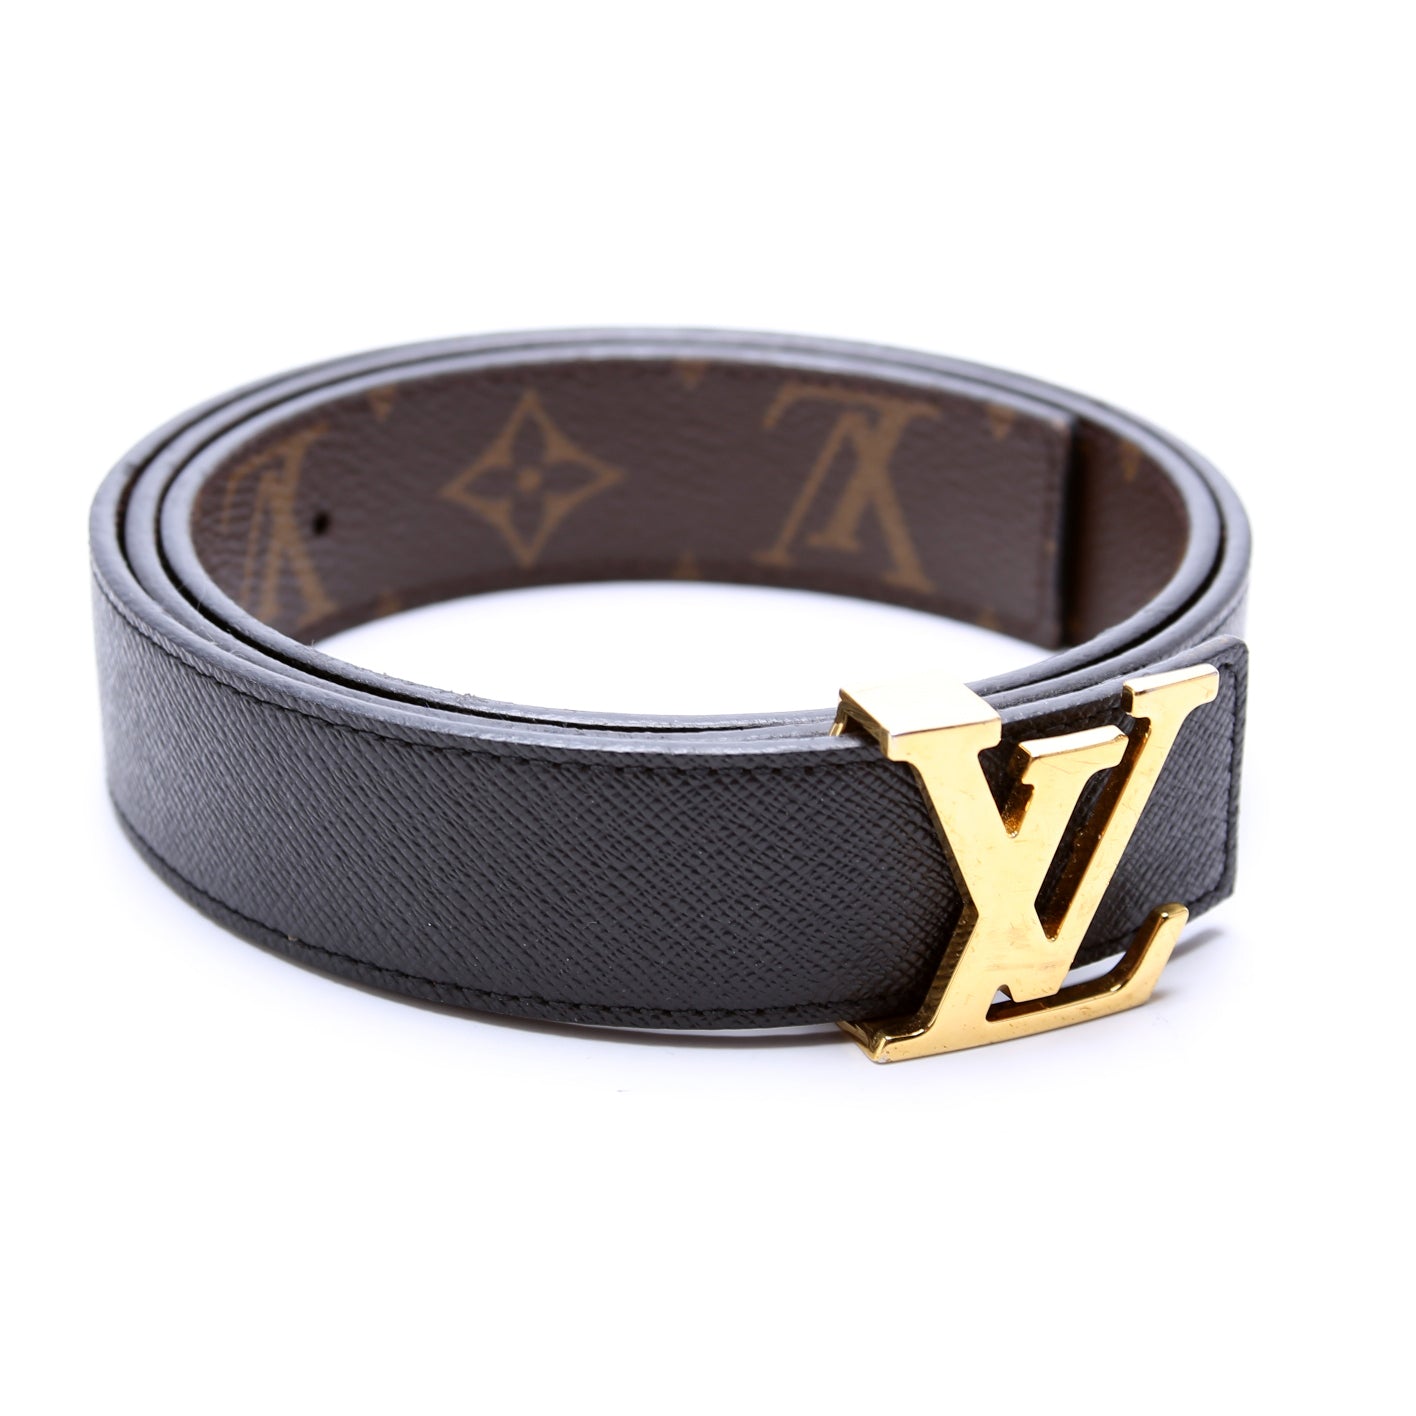 Louis Vuitton - Authenticated Initiales Belt - Leather Brown for Men, Very Good Condition